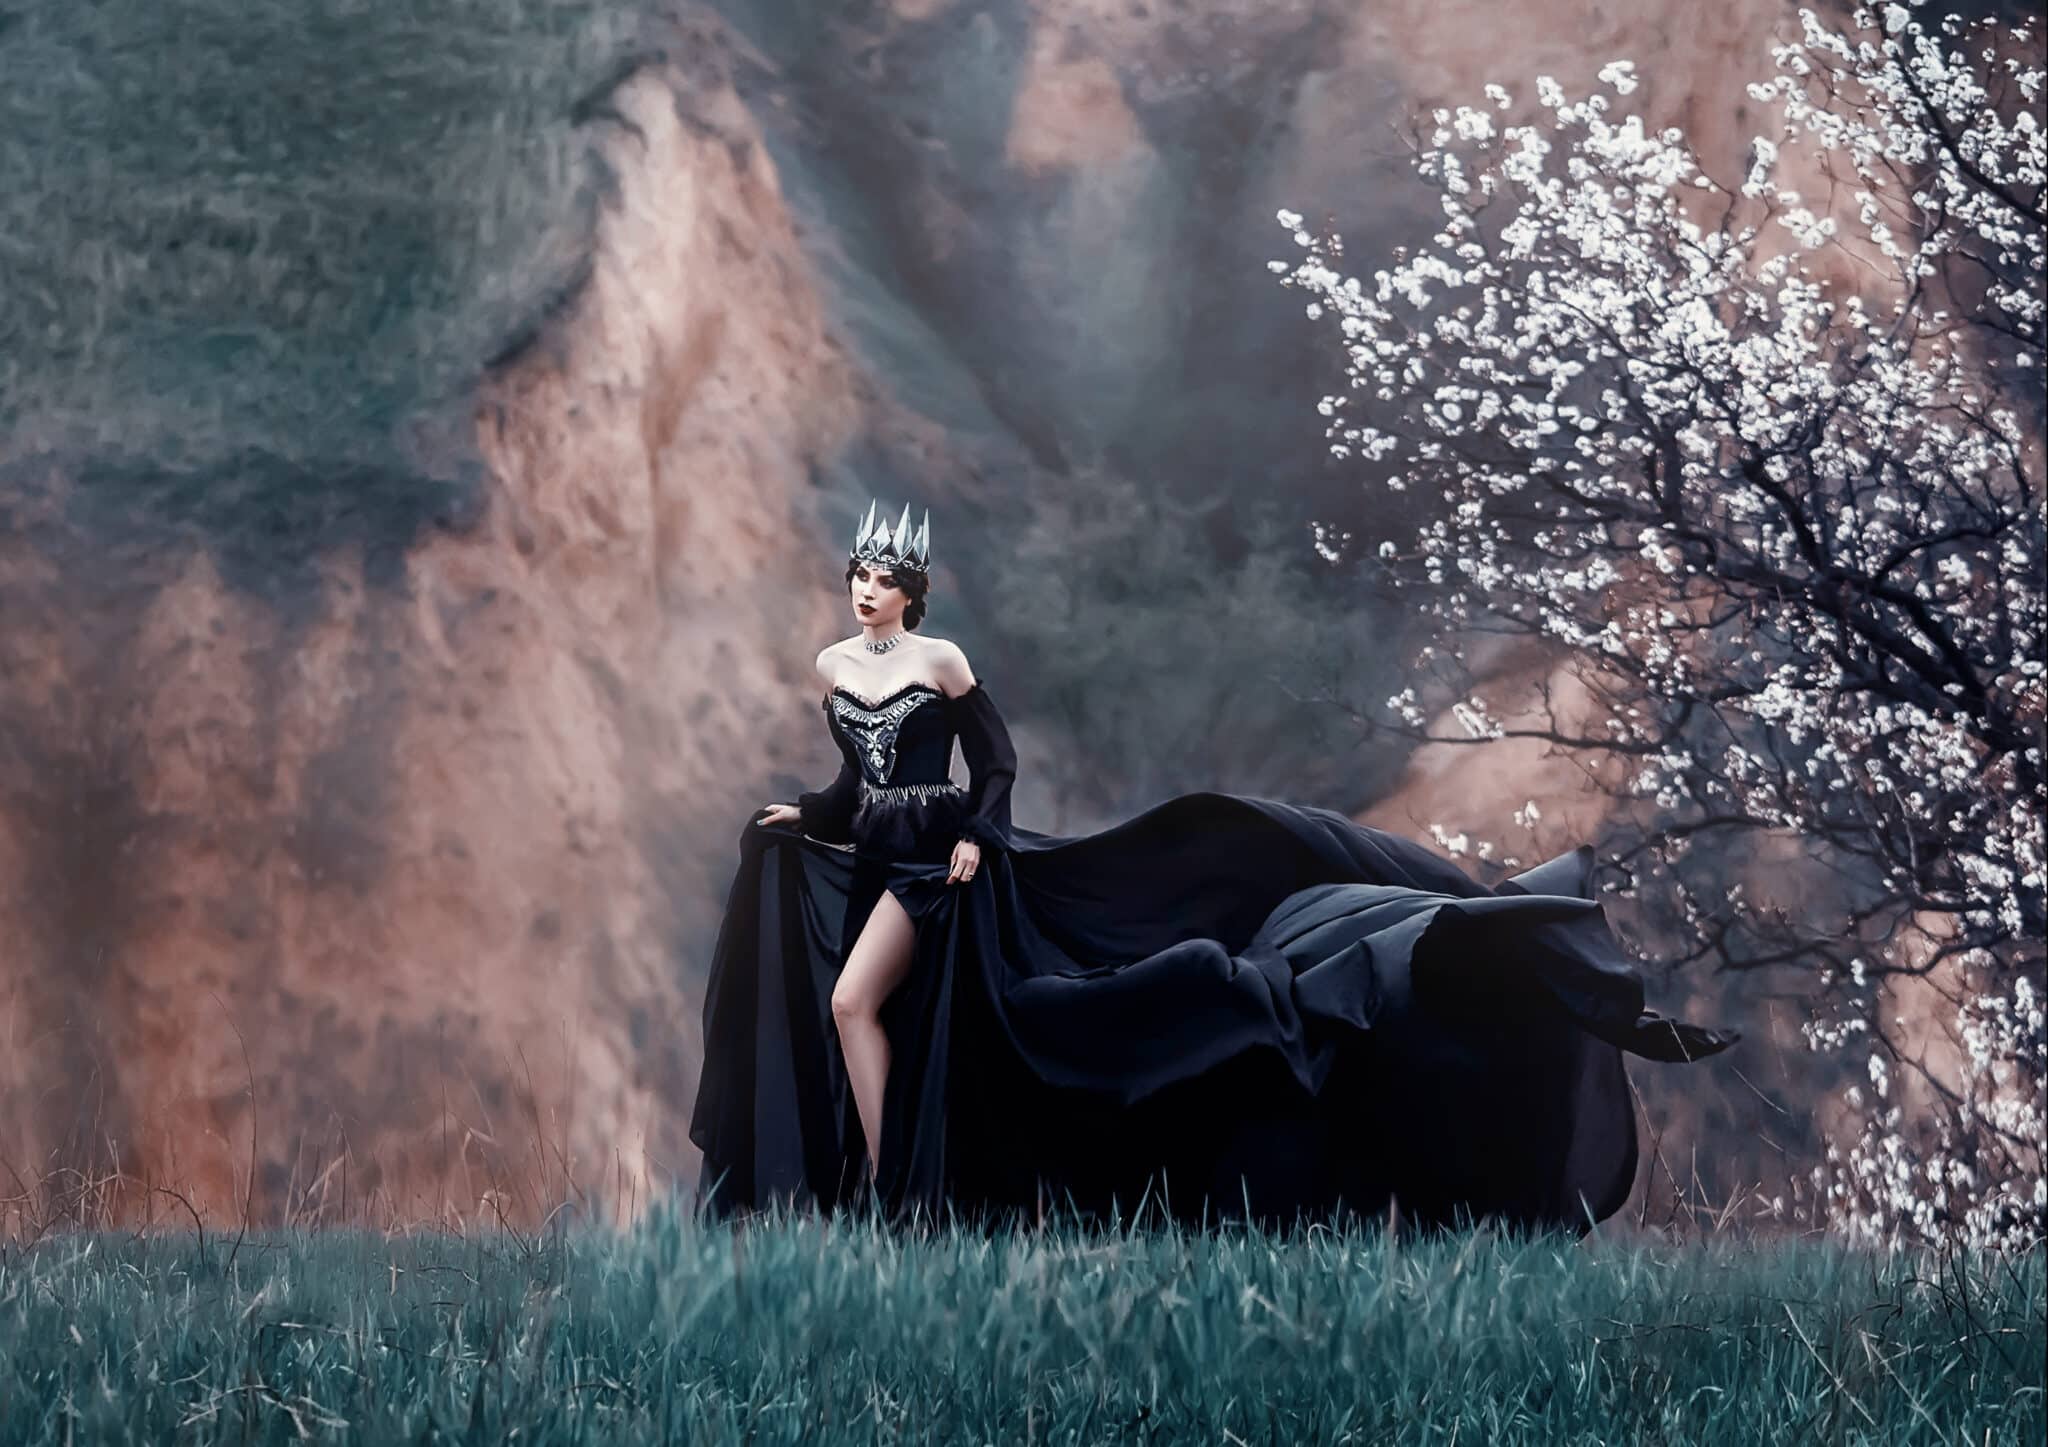 queen of night in luxurious black dress with long flying train, lady with dark makeup, metal cold jewelry and crown, mysterious priestess on grassy slope near blossoming tree, gloomy gothic image.